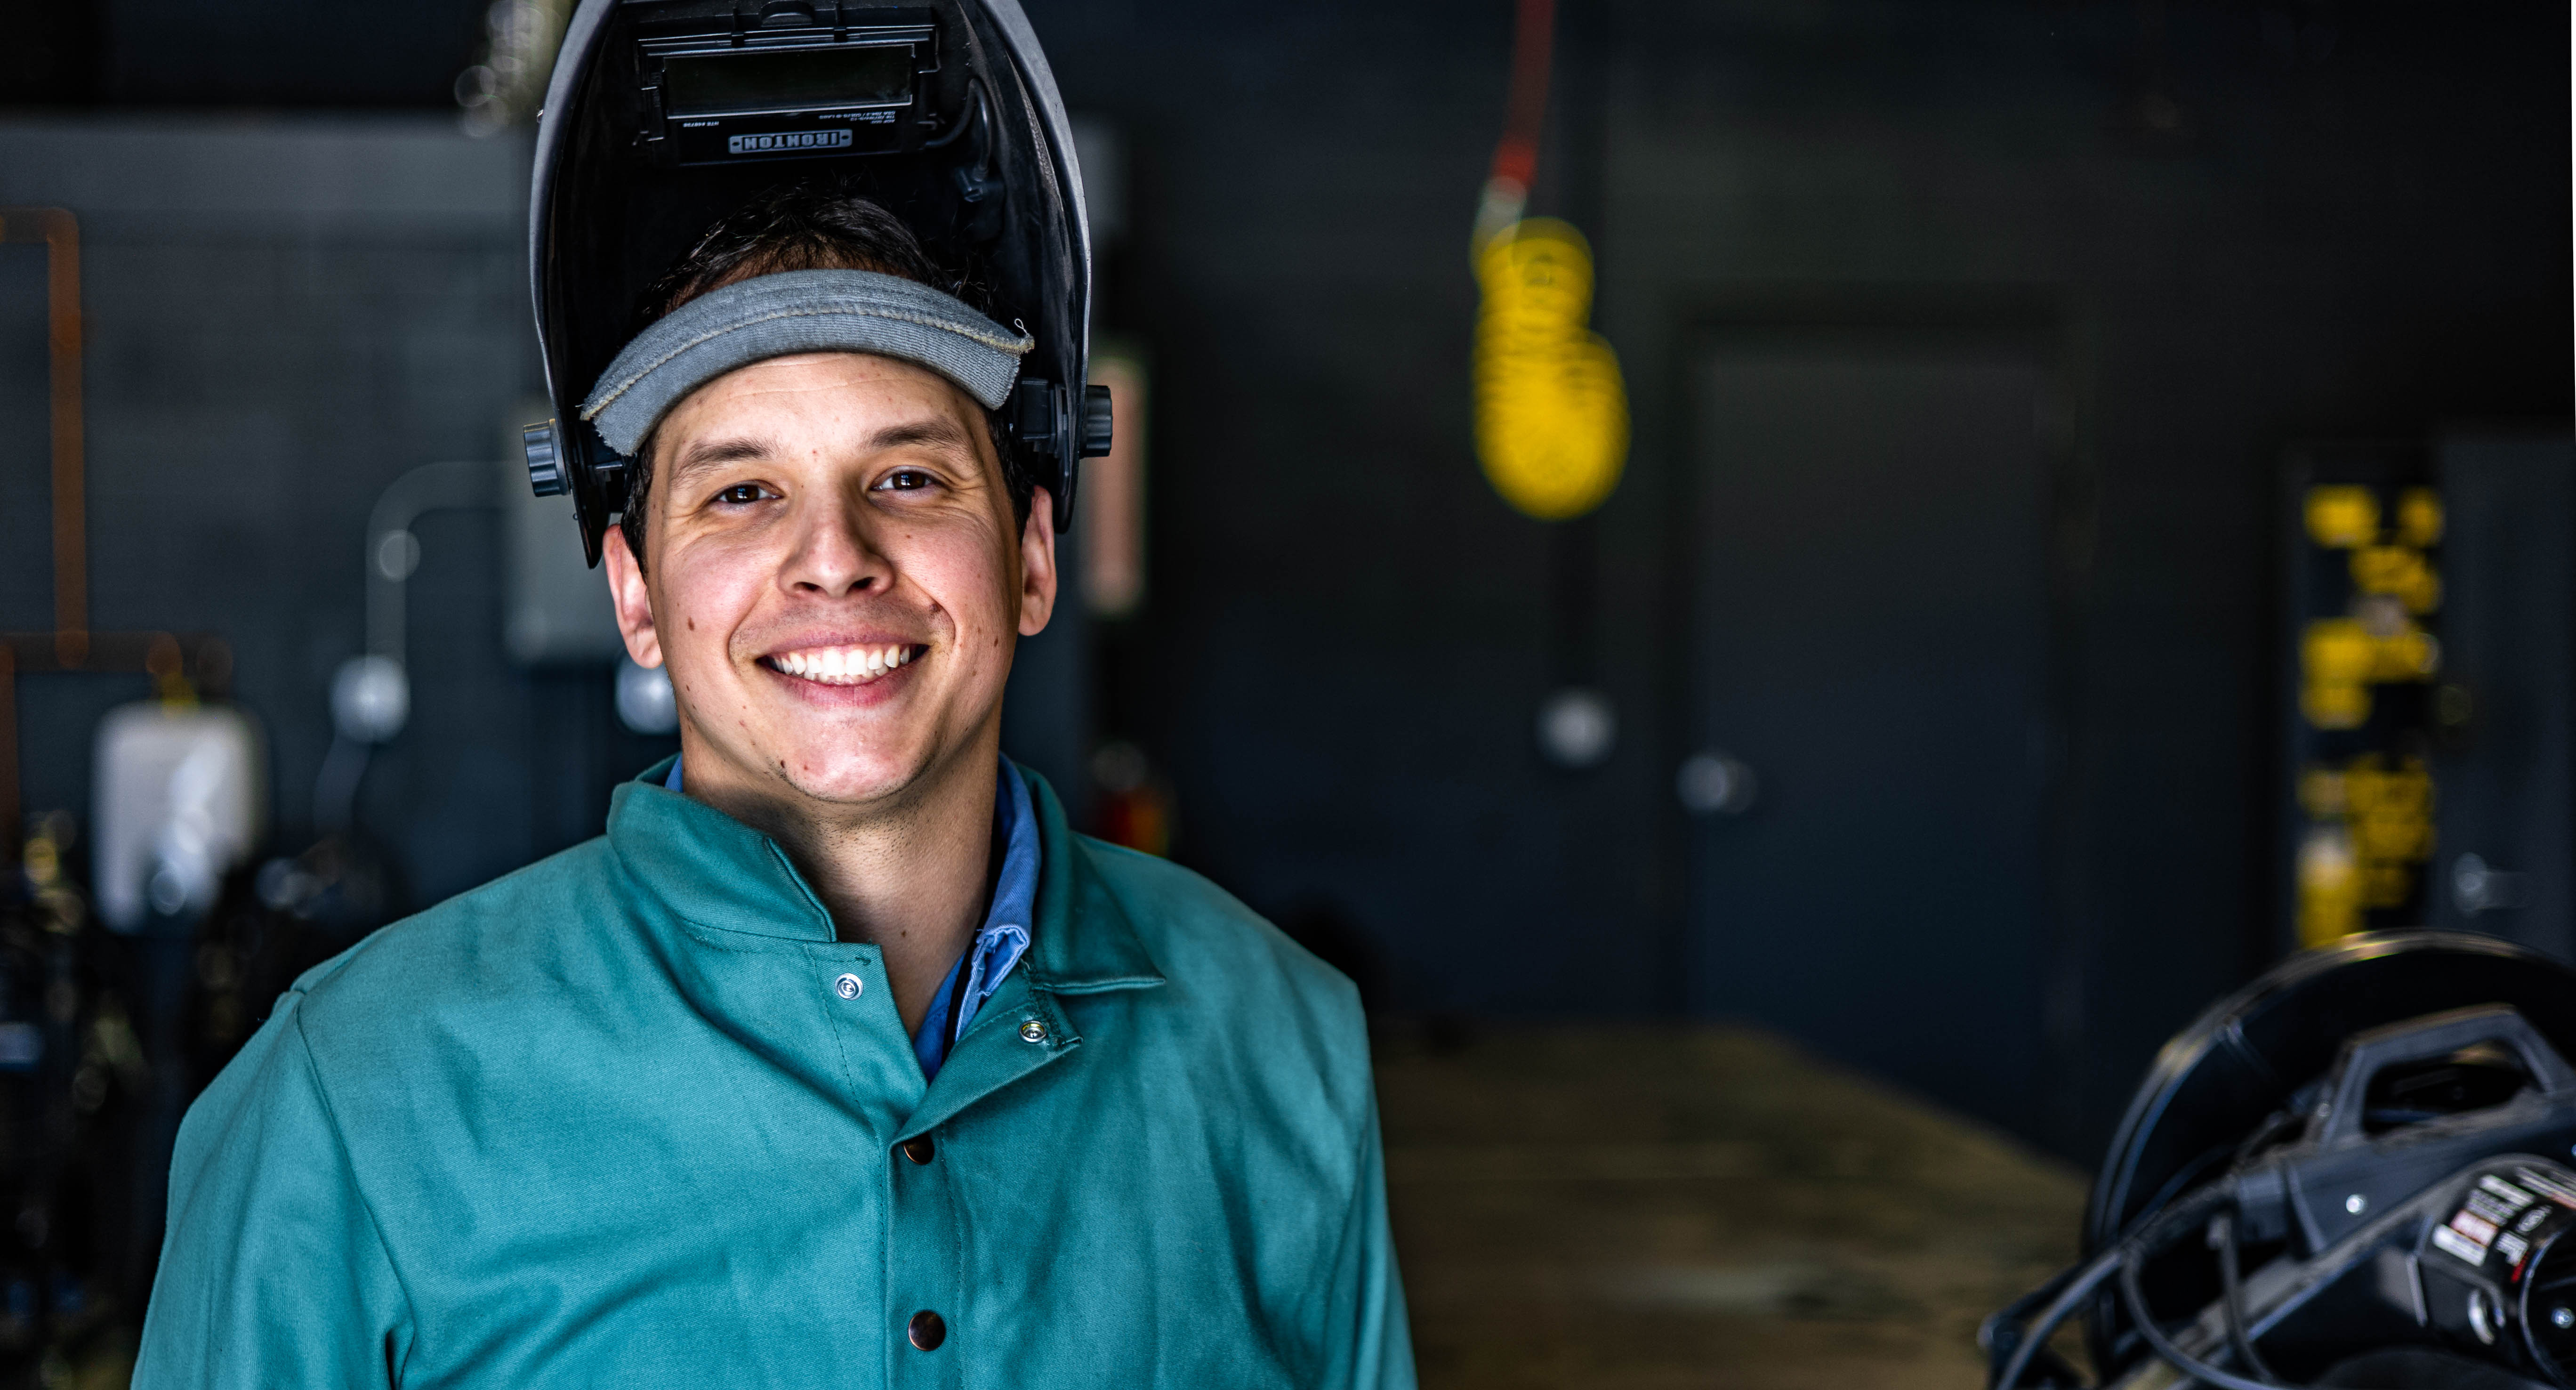 Alex Armata smiling wearing welding safety gear pictured in a welding workshop